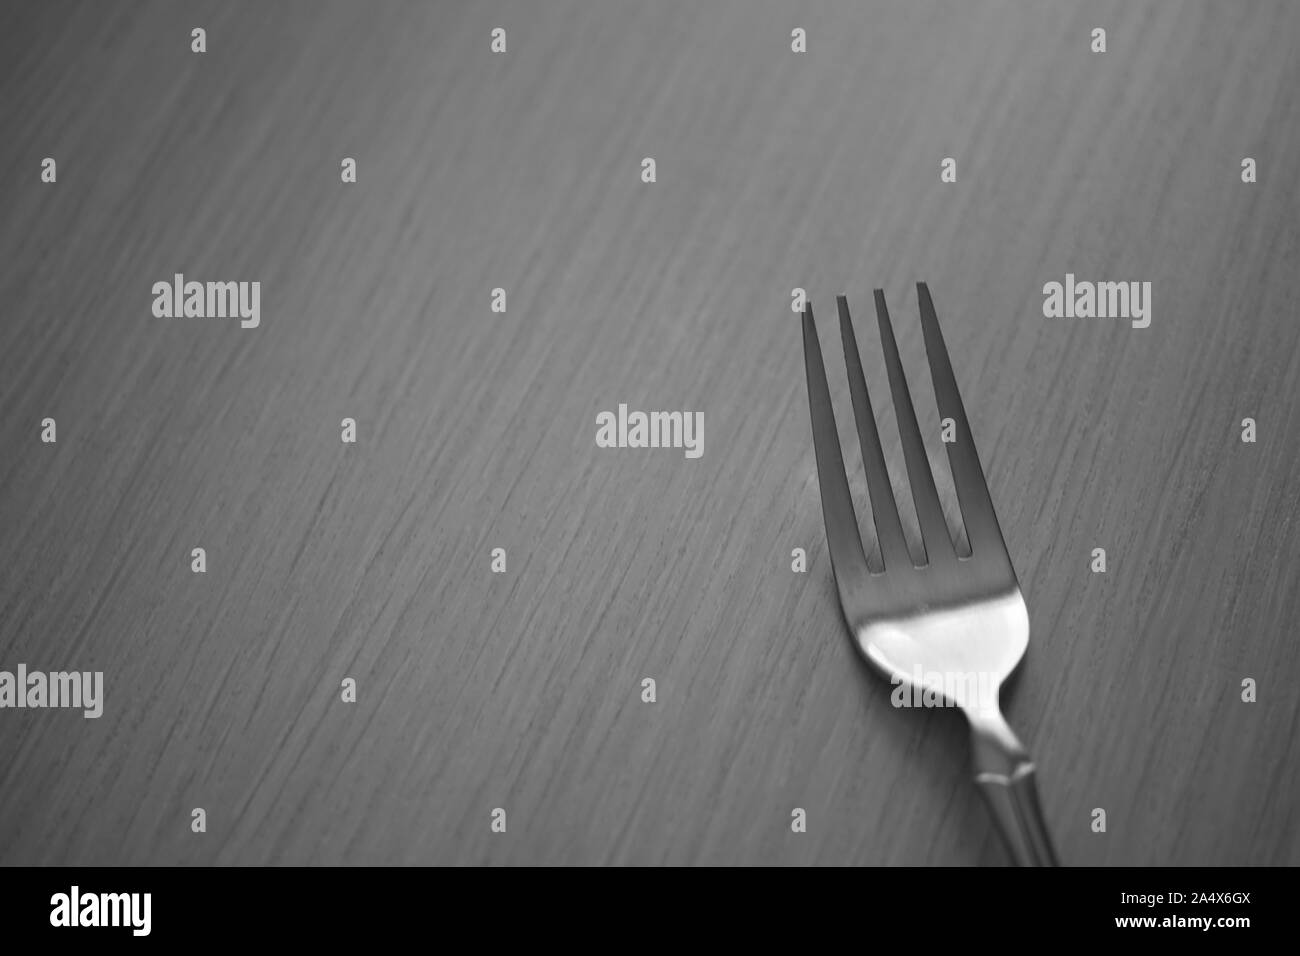 Fork on the wooden table. Black and white photo. Top view. Stock Photo